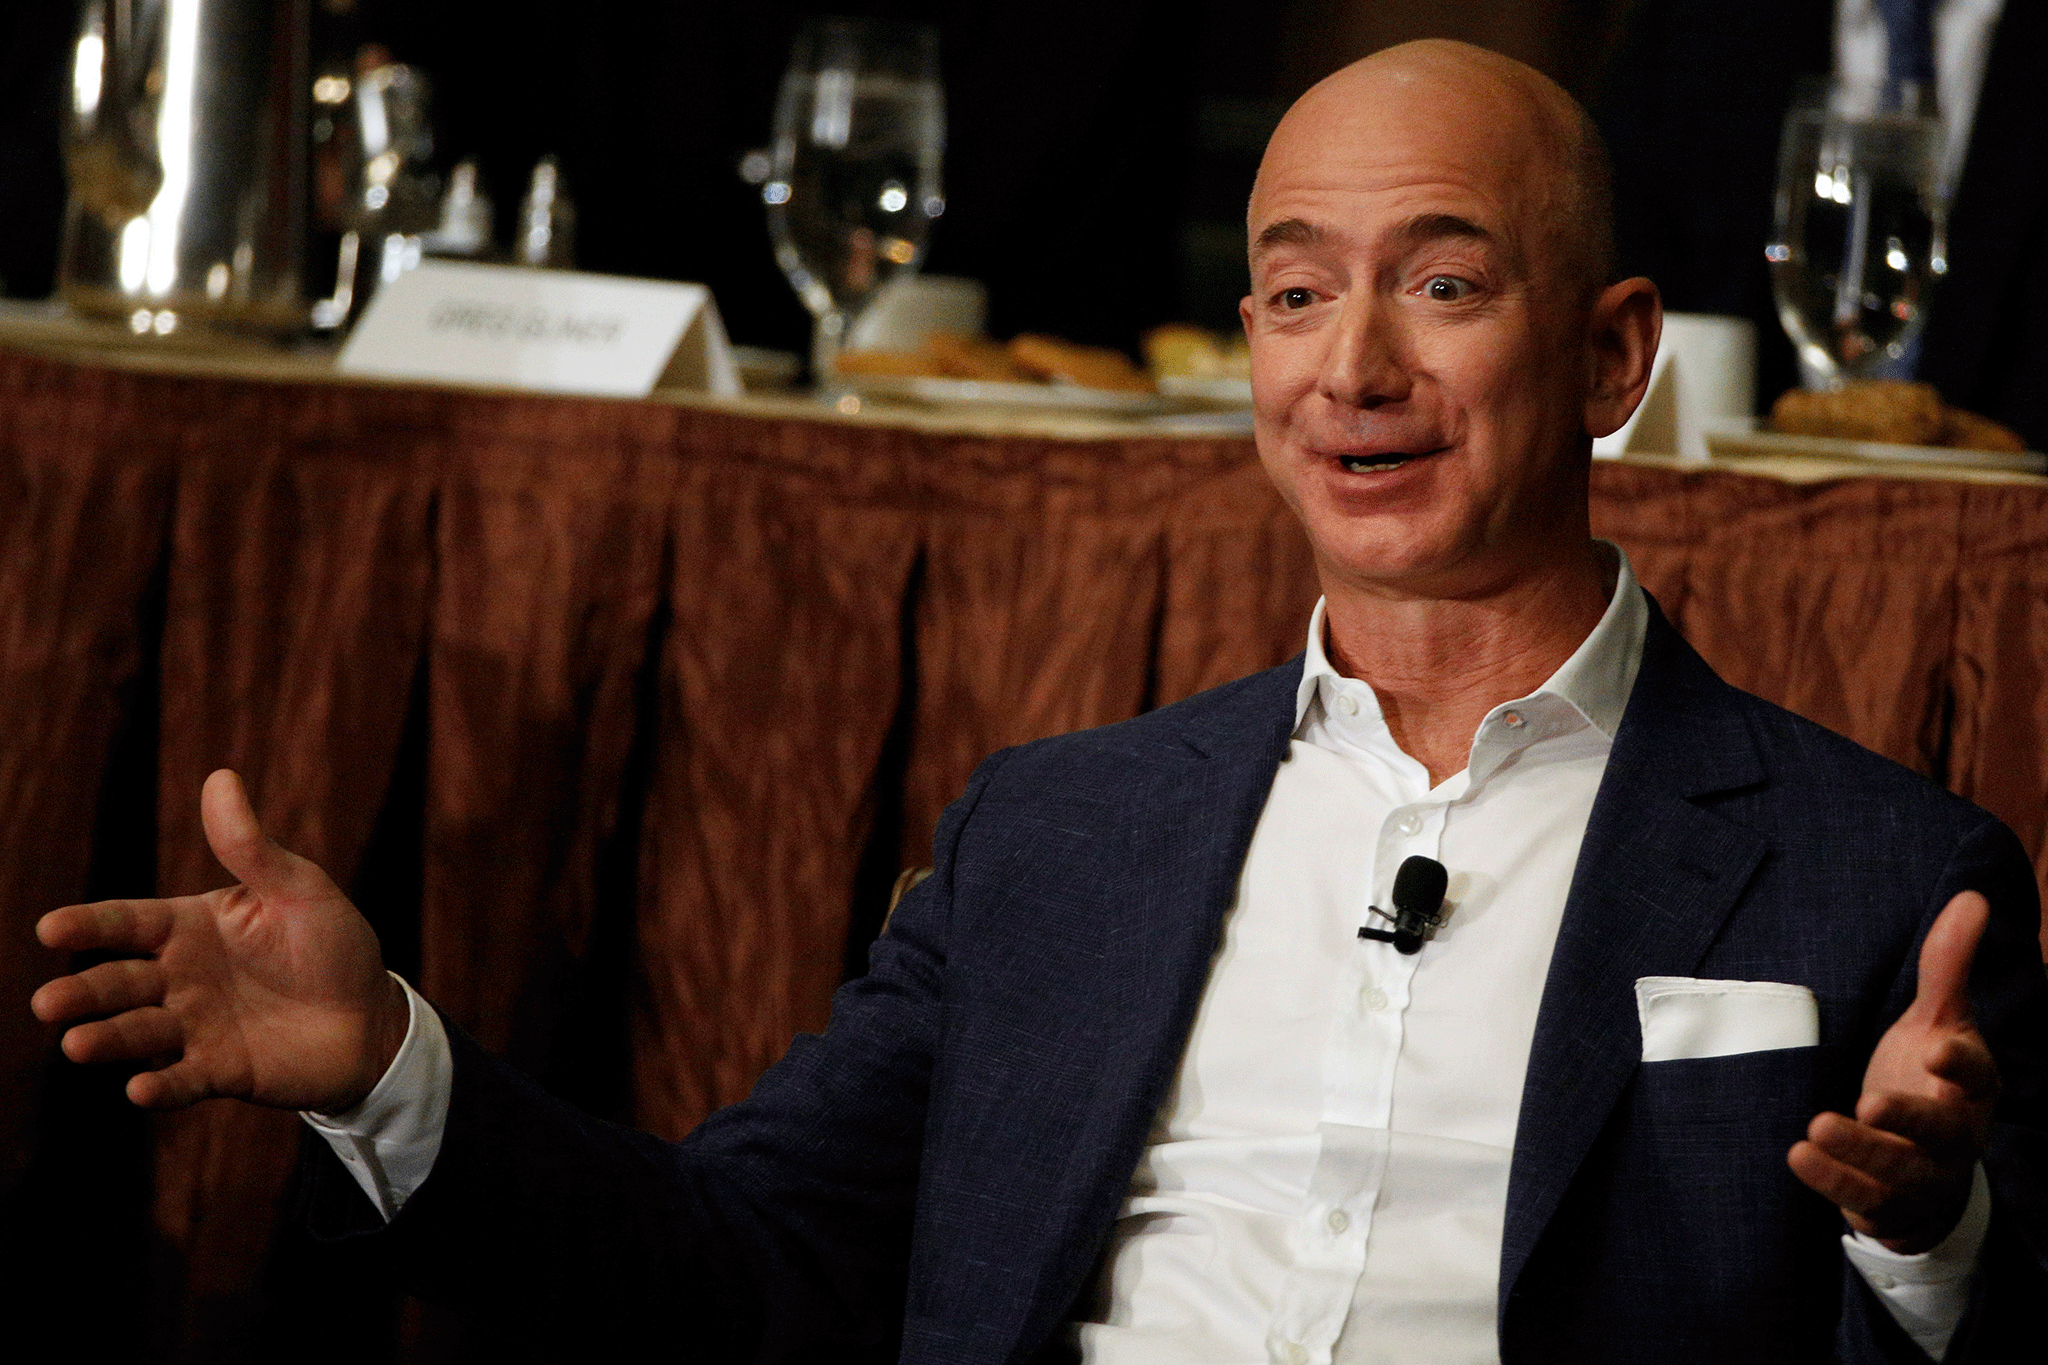 The Amazon boss is already a benefactor of Princeton University, his alma mater, and supports efforts such as cancer research and the Marys Place homeless shelter in Seattle